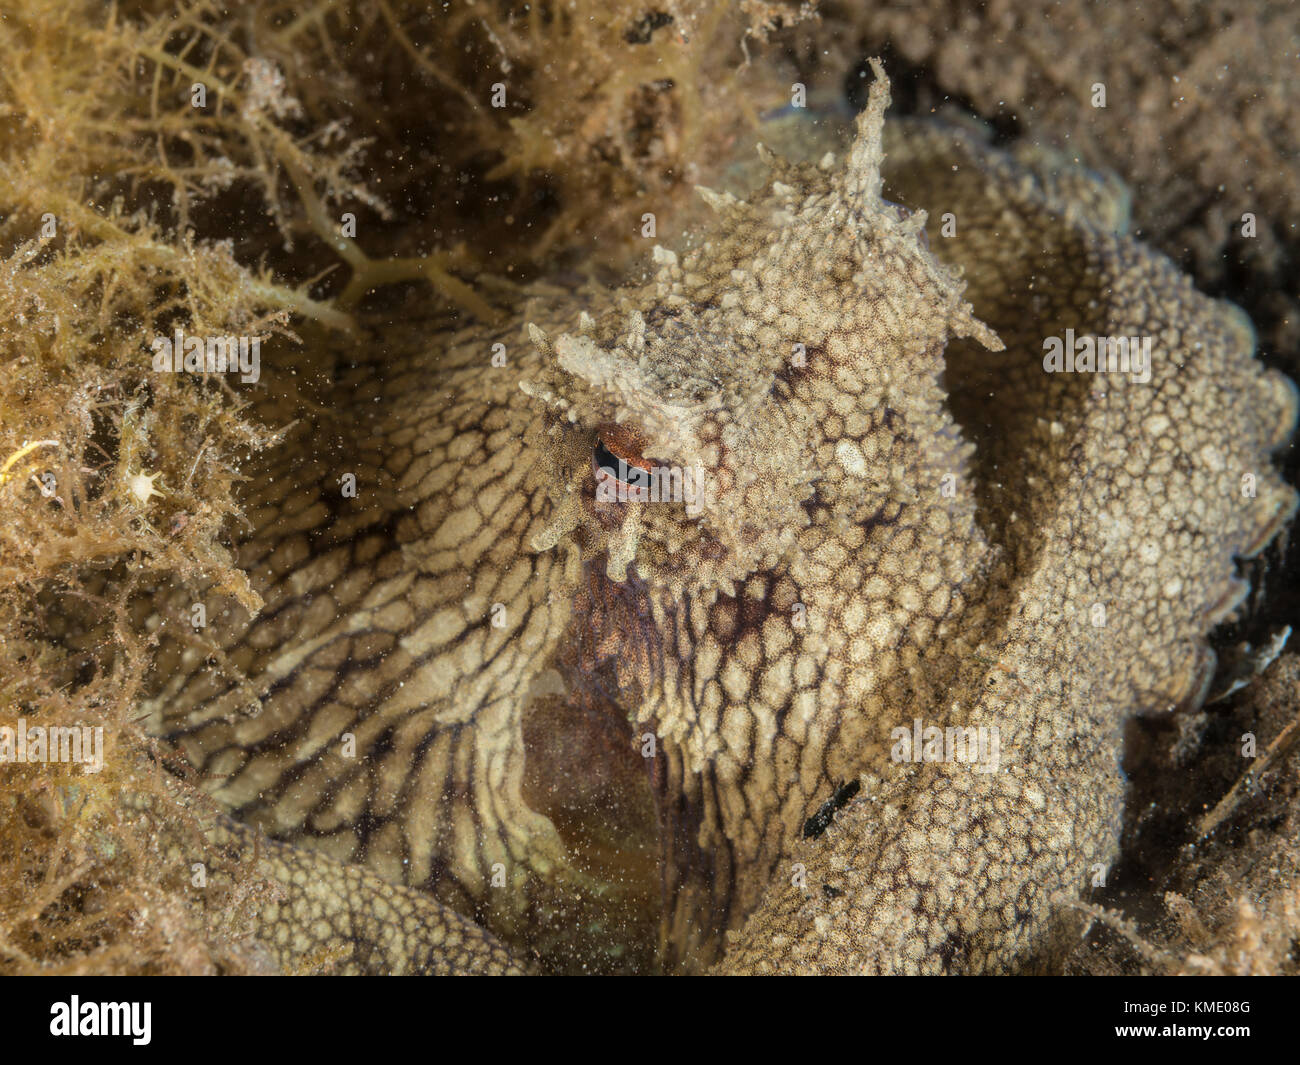 Coconut octopus trying to hide under sea grass Stock Photo